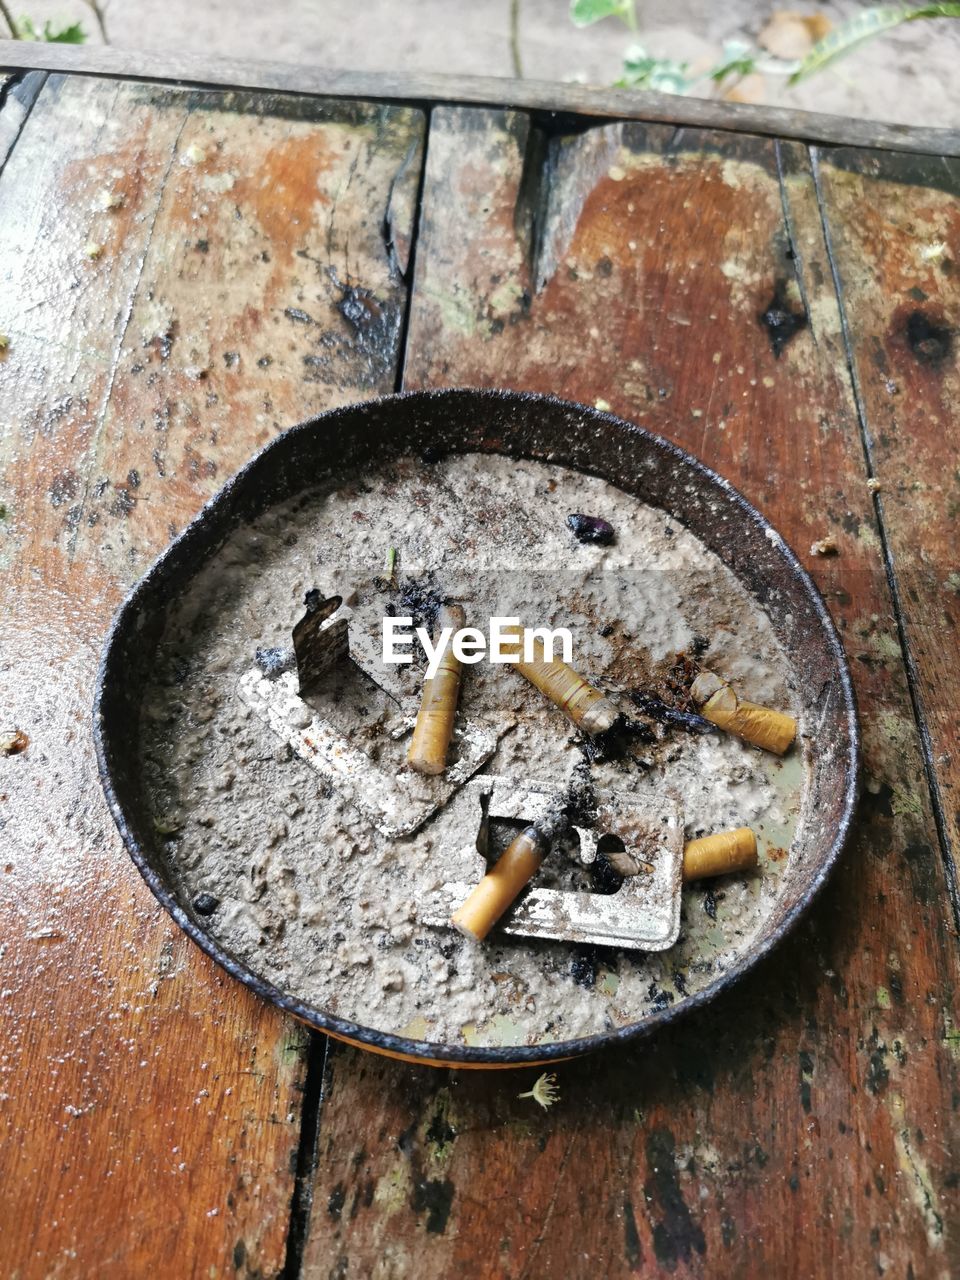 cigarette, cigarette butt, ashtray, smoking issues, bad habit, no people, wood, high angle view, communication, sign, warning sign, close-up, day, iron, metal, burnt, social issues, art